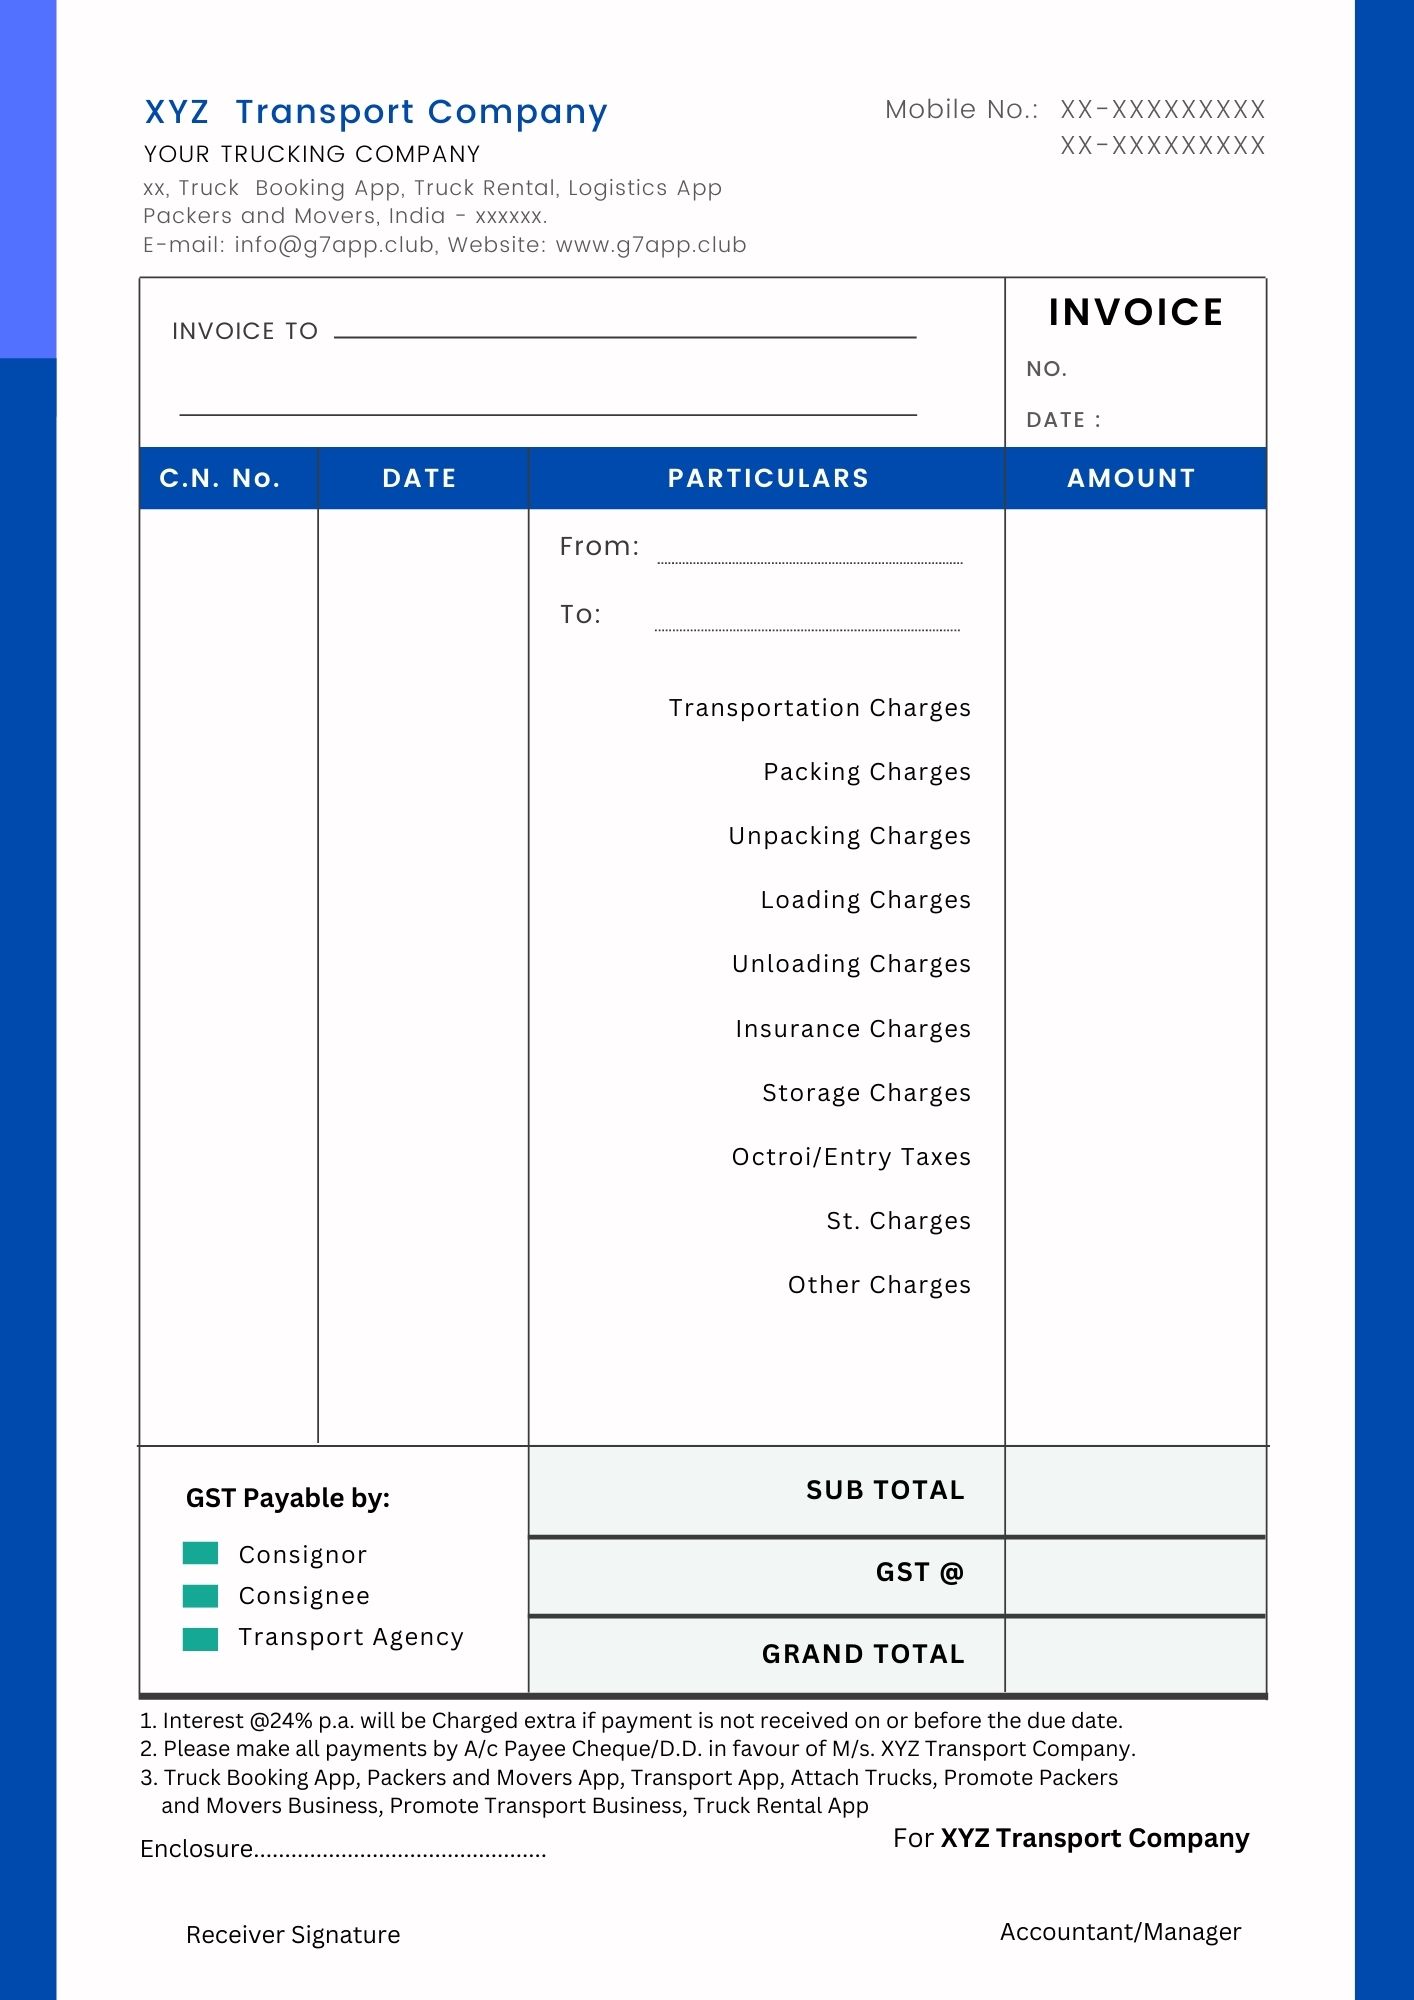 'Jpg Format of Moving companies Invoice and Bill'